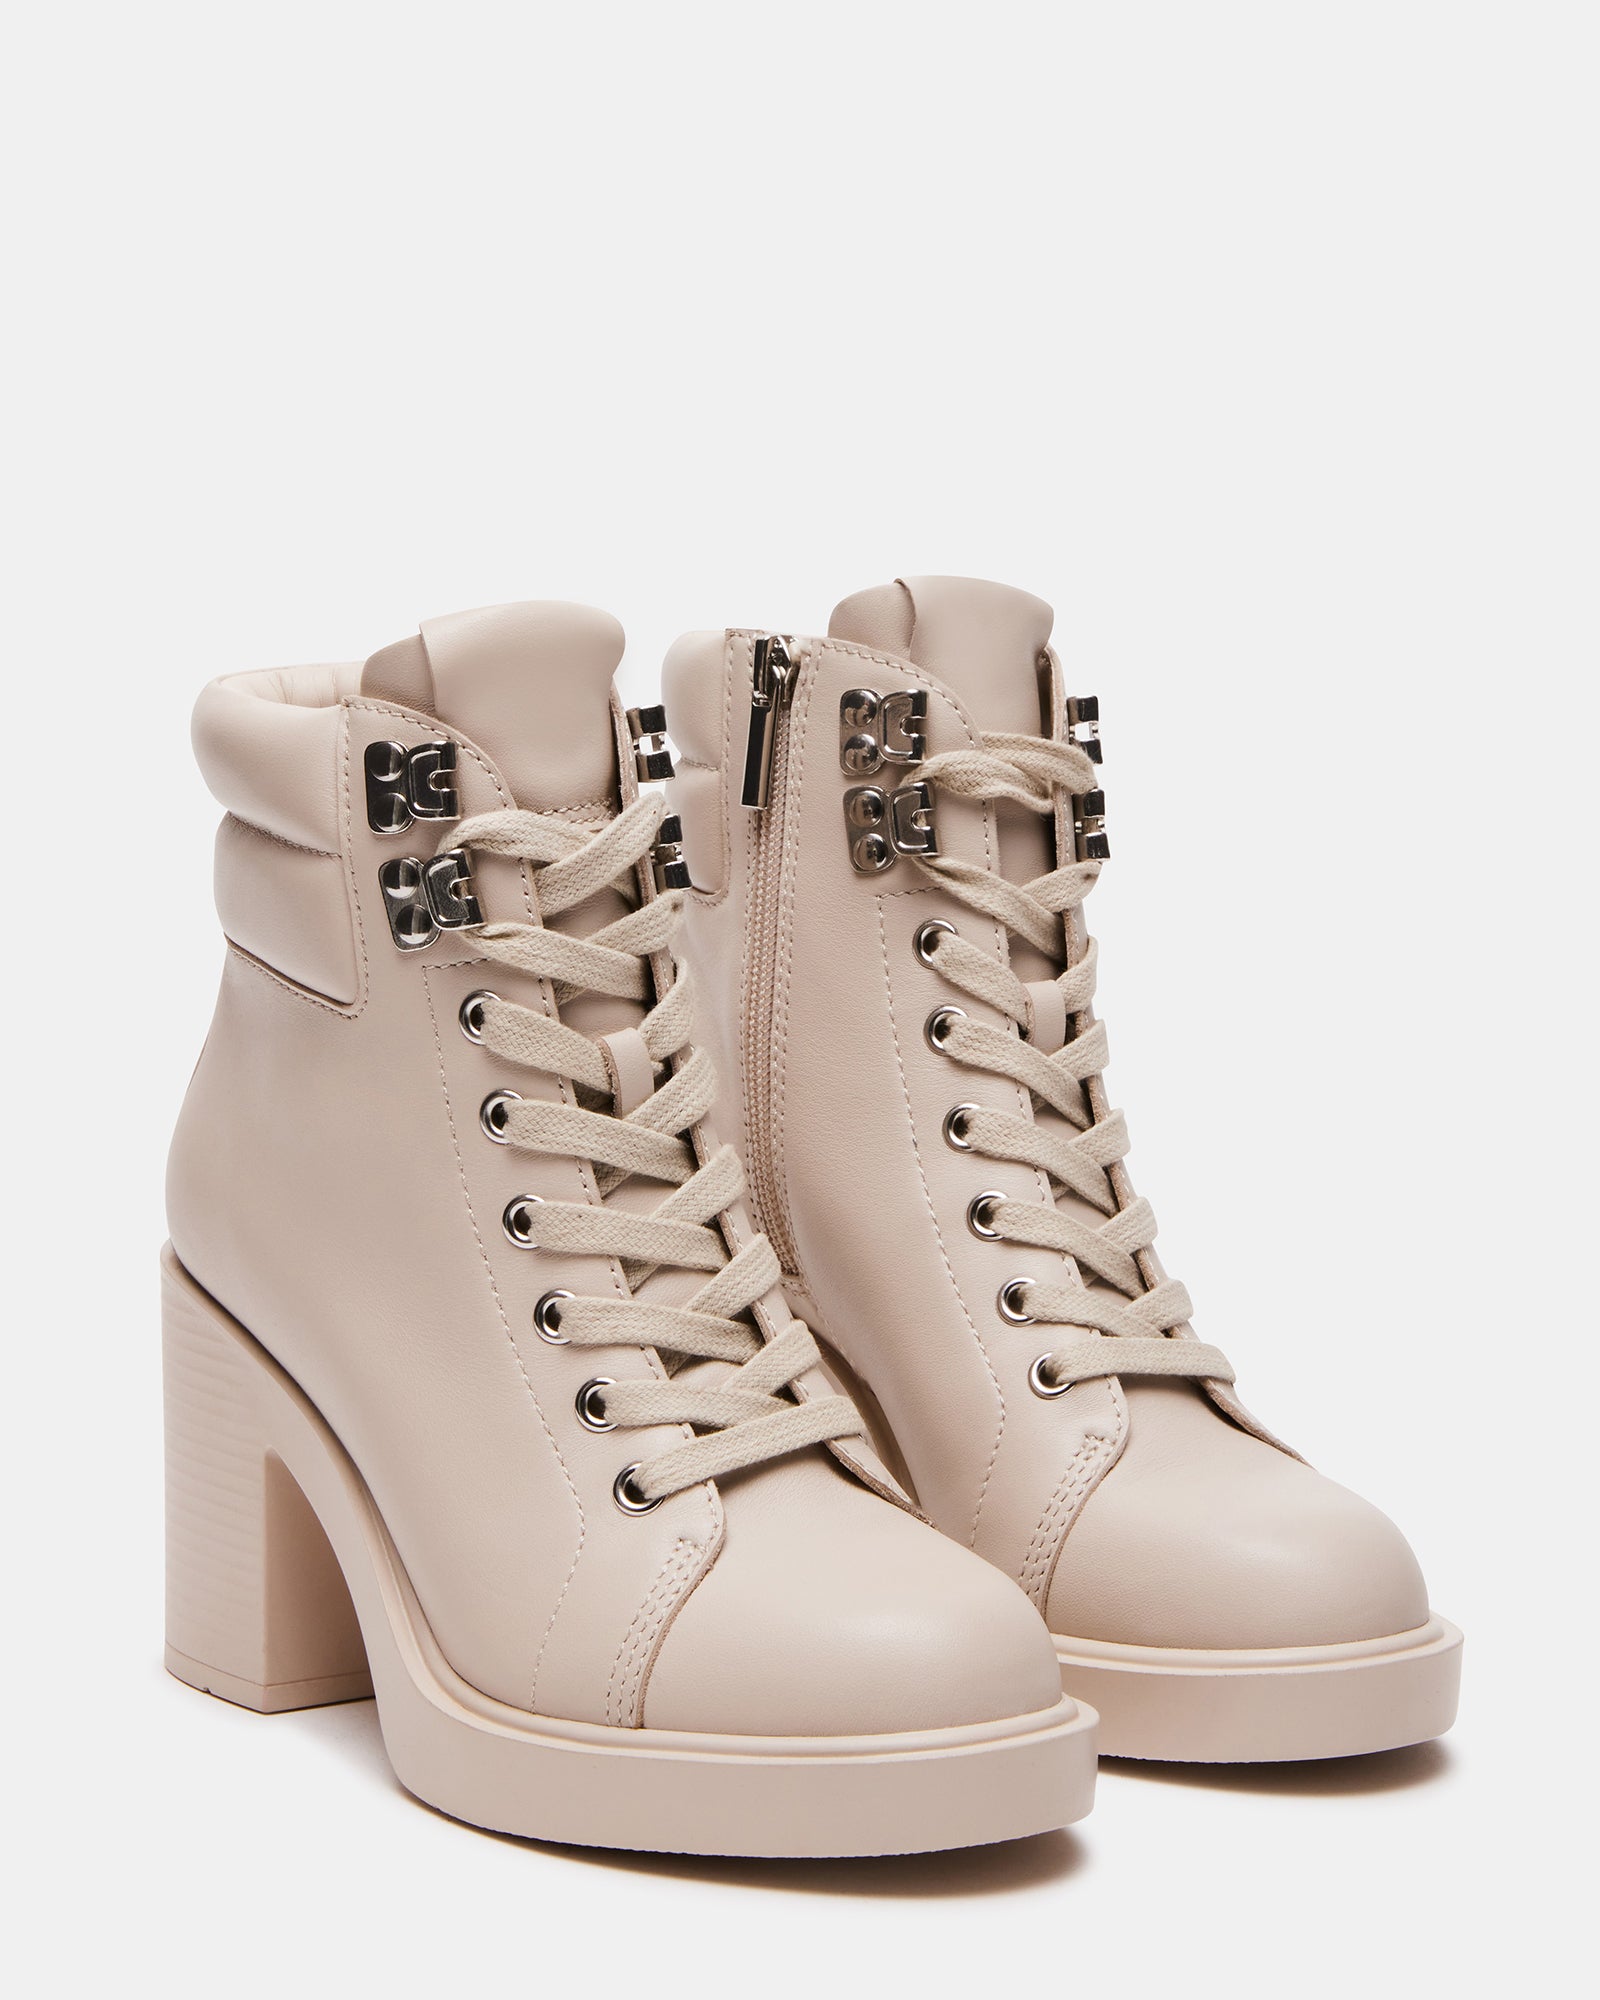 ORION Bone Leather Lace Up Combat Bootie | Women's Booties – Steve Madden